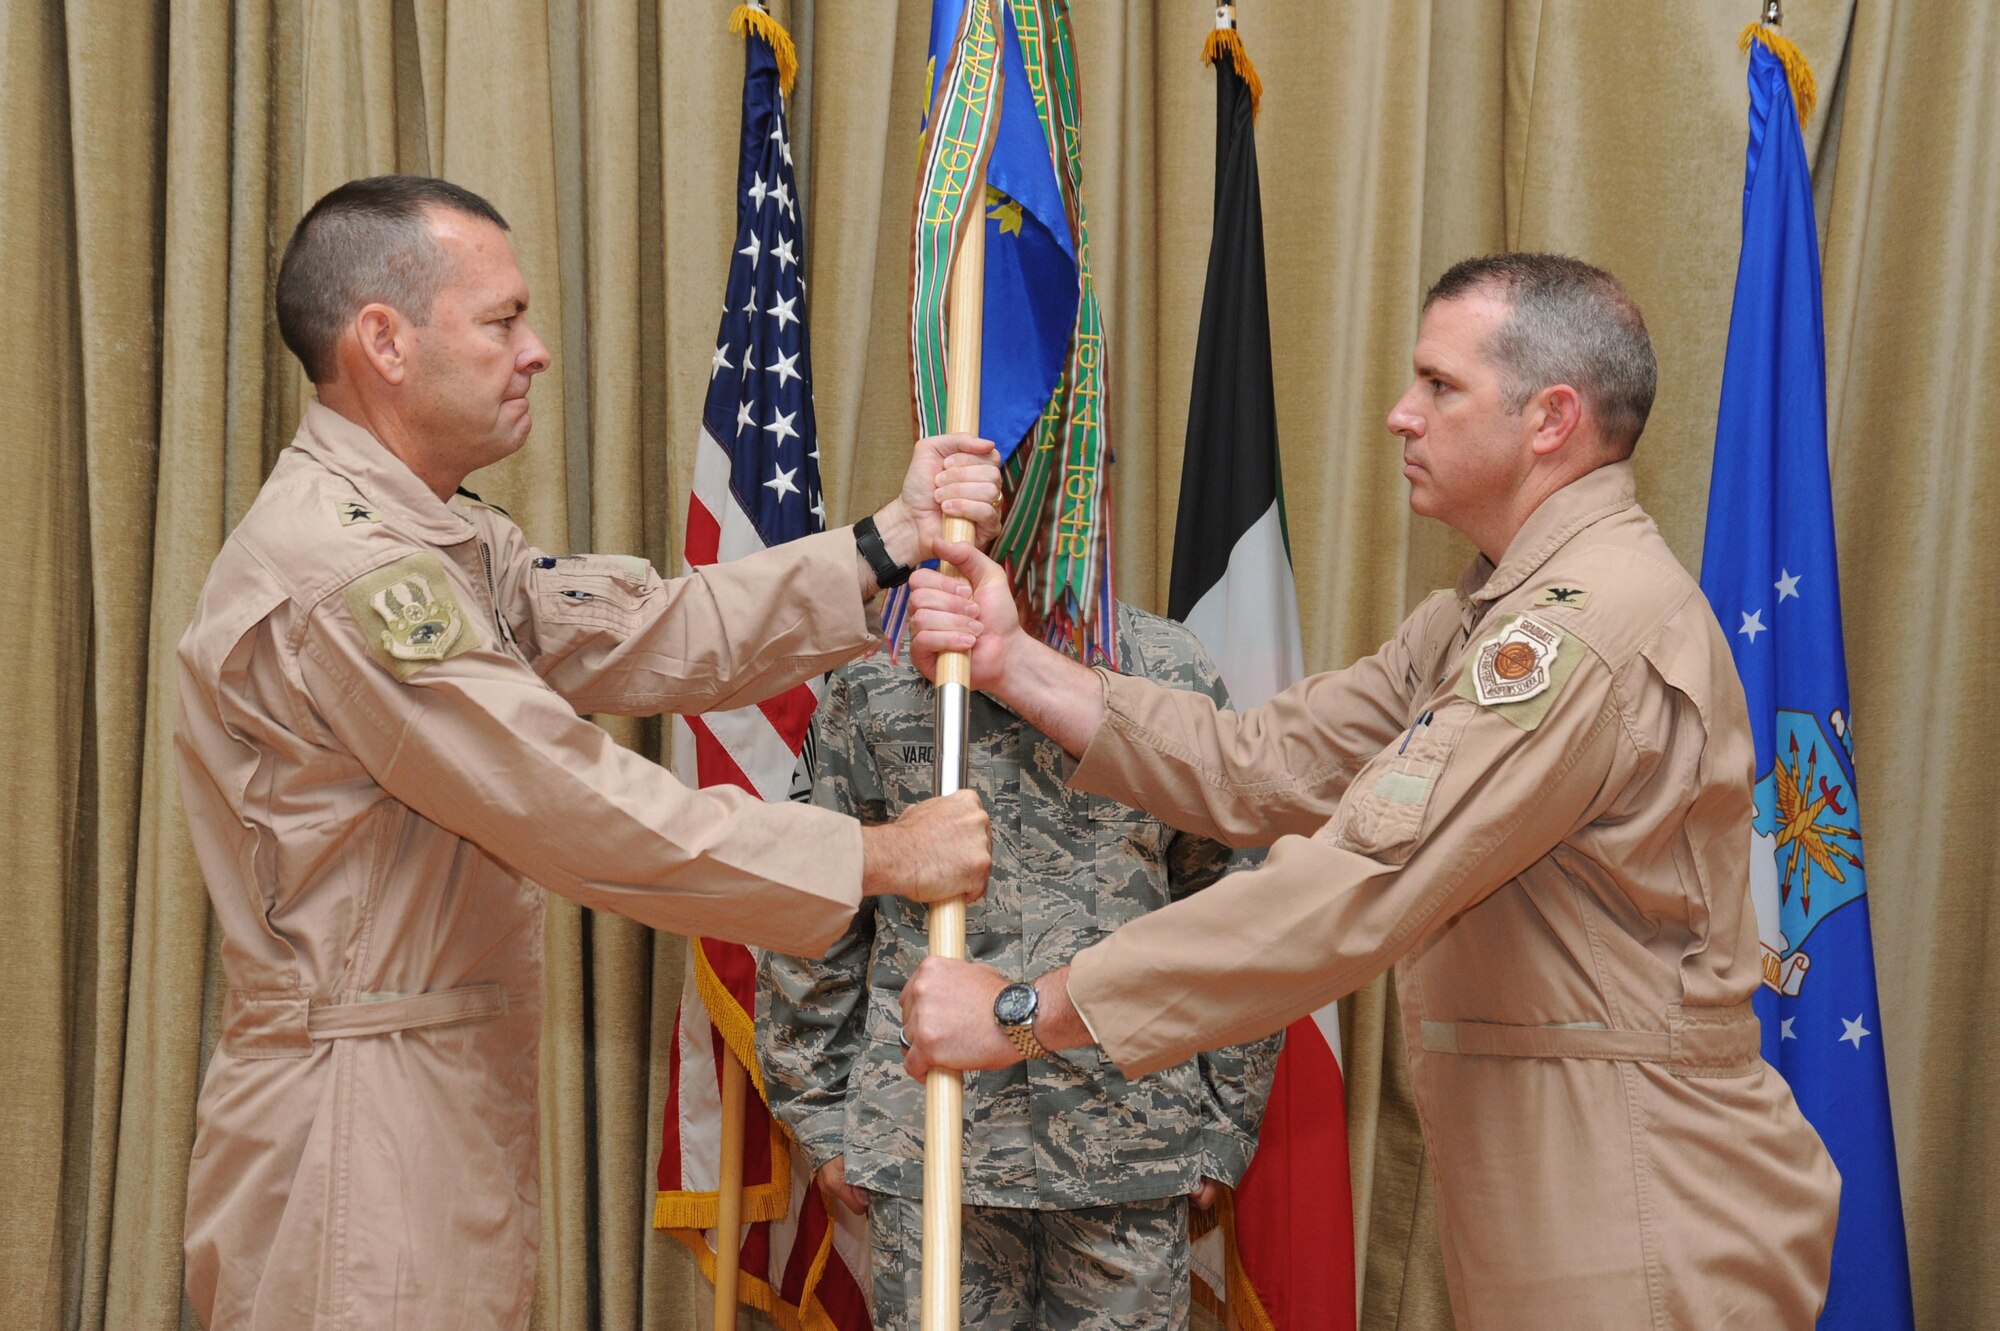 Col. Charles Bolton, 386th Air Expeditionary Wing commander, receives the guidon from Maj. Gen. Scott Kindsvater, 9th Air Expeditionary Task Force-Levant commander, during a change of command ceremony at an undisclosed location in Southwest Asia, June 20, 2016. Bolton assumed command after serving as the 314th Operations Group commander at Little Rock Air Force Base, Arkansas. (U.S. Air Force photo by Senior Airman Zachary Kee)